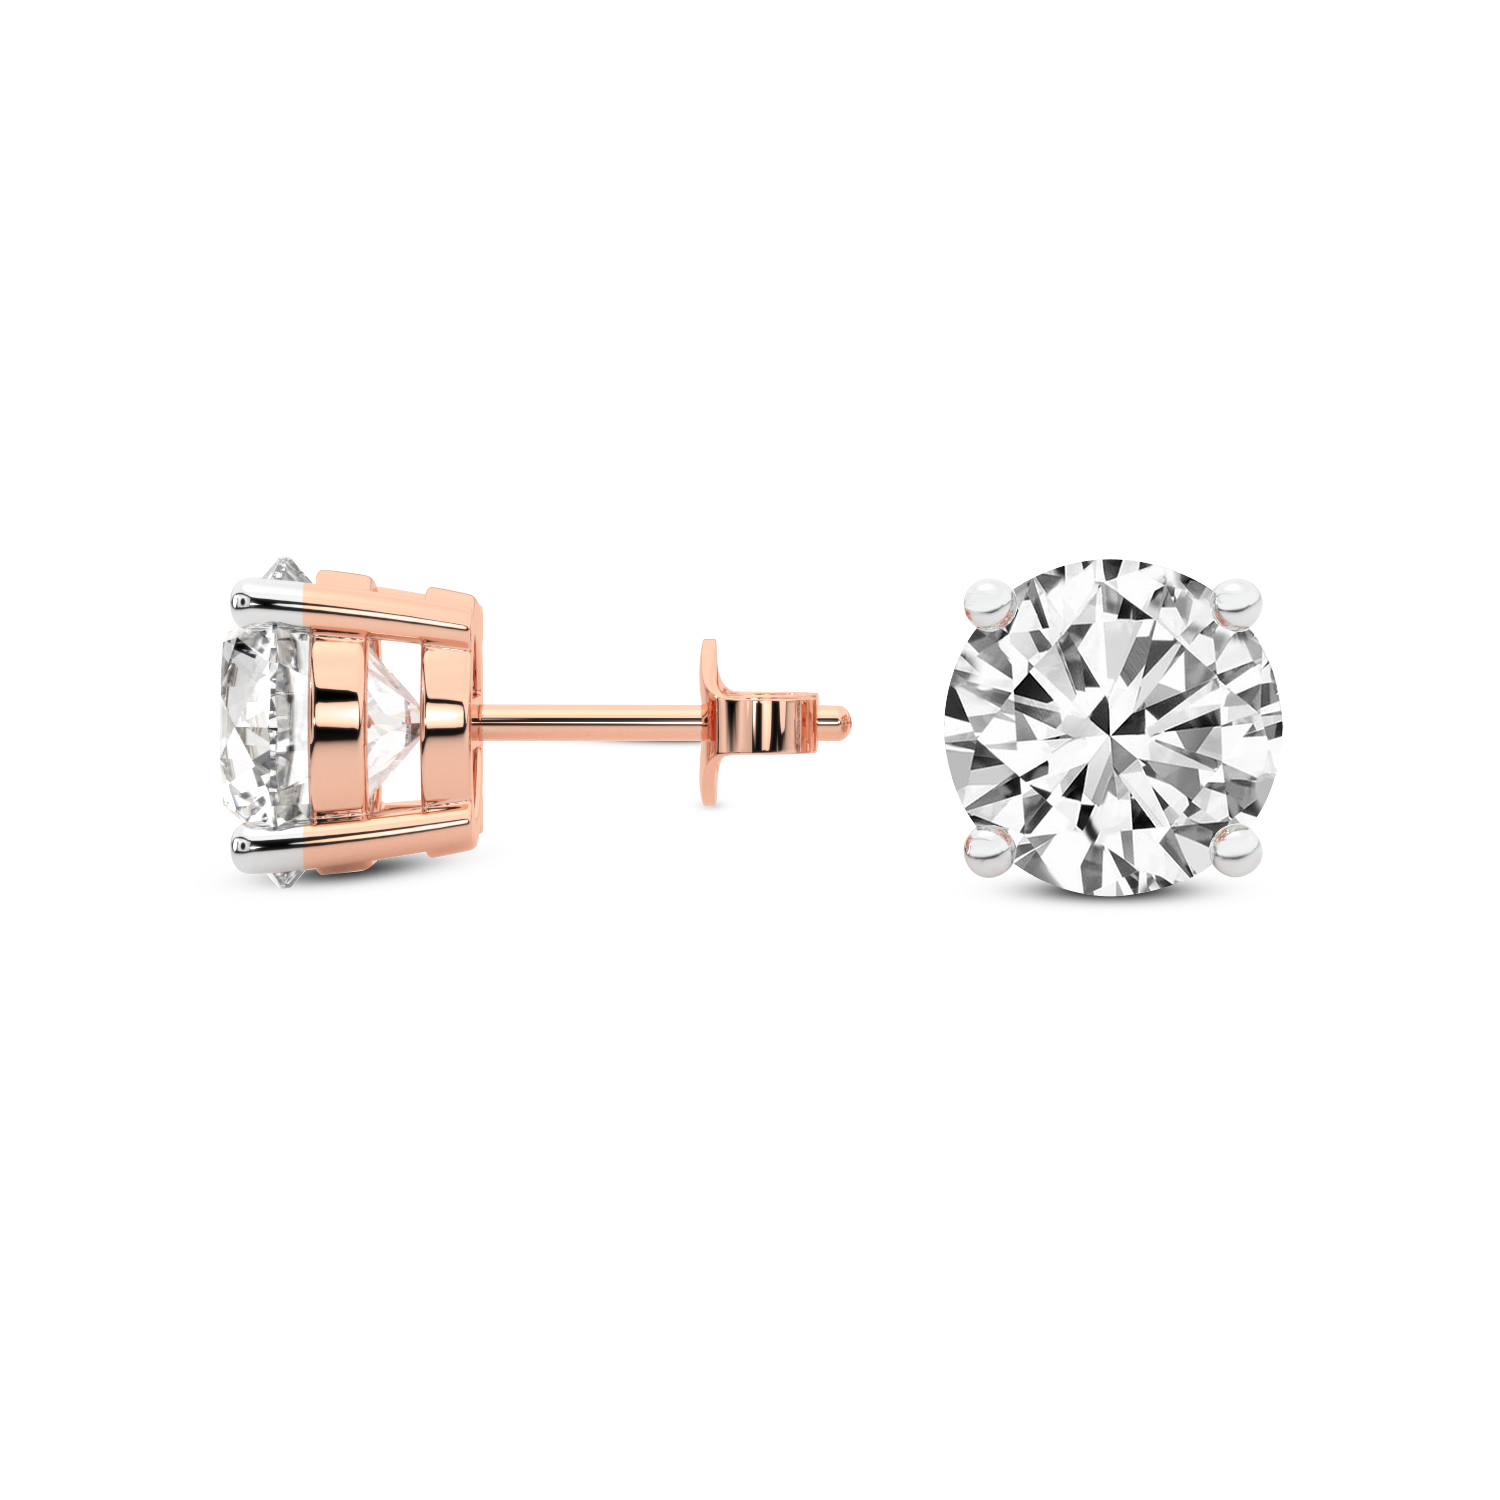 4 Prong Round Lab Diamond Stud Earrings rose gold earring, small left view